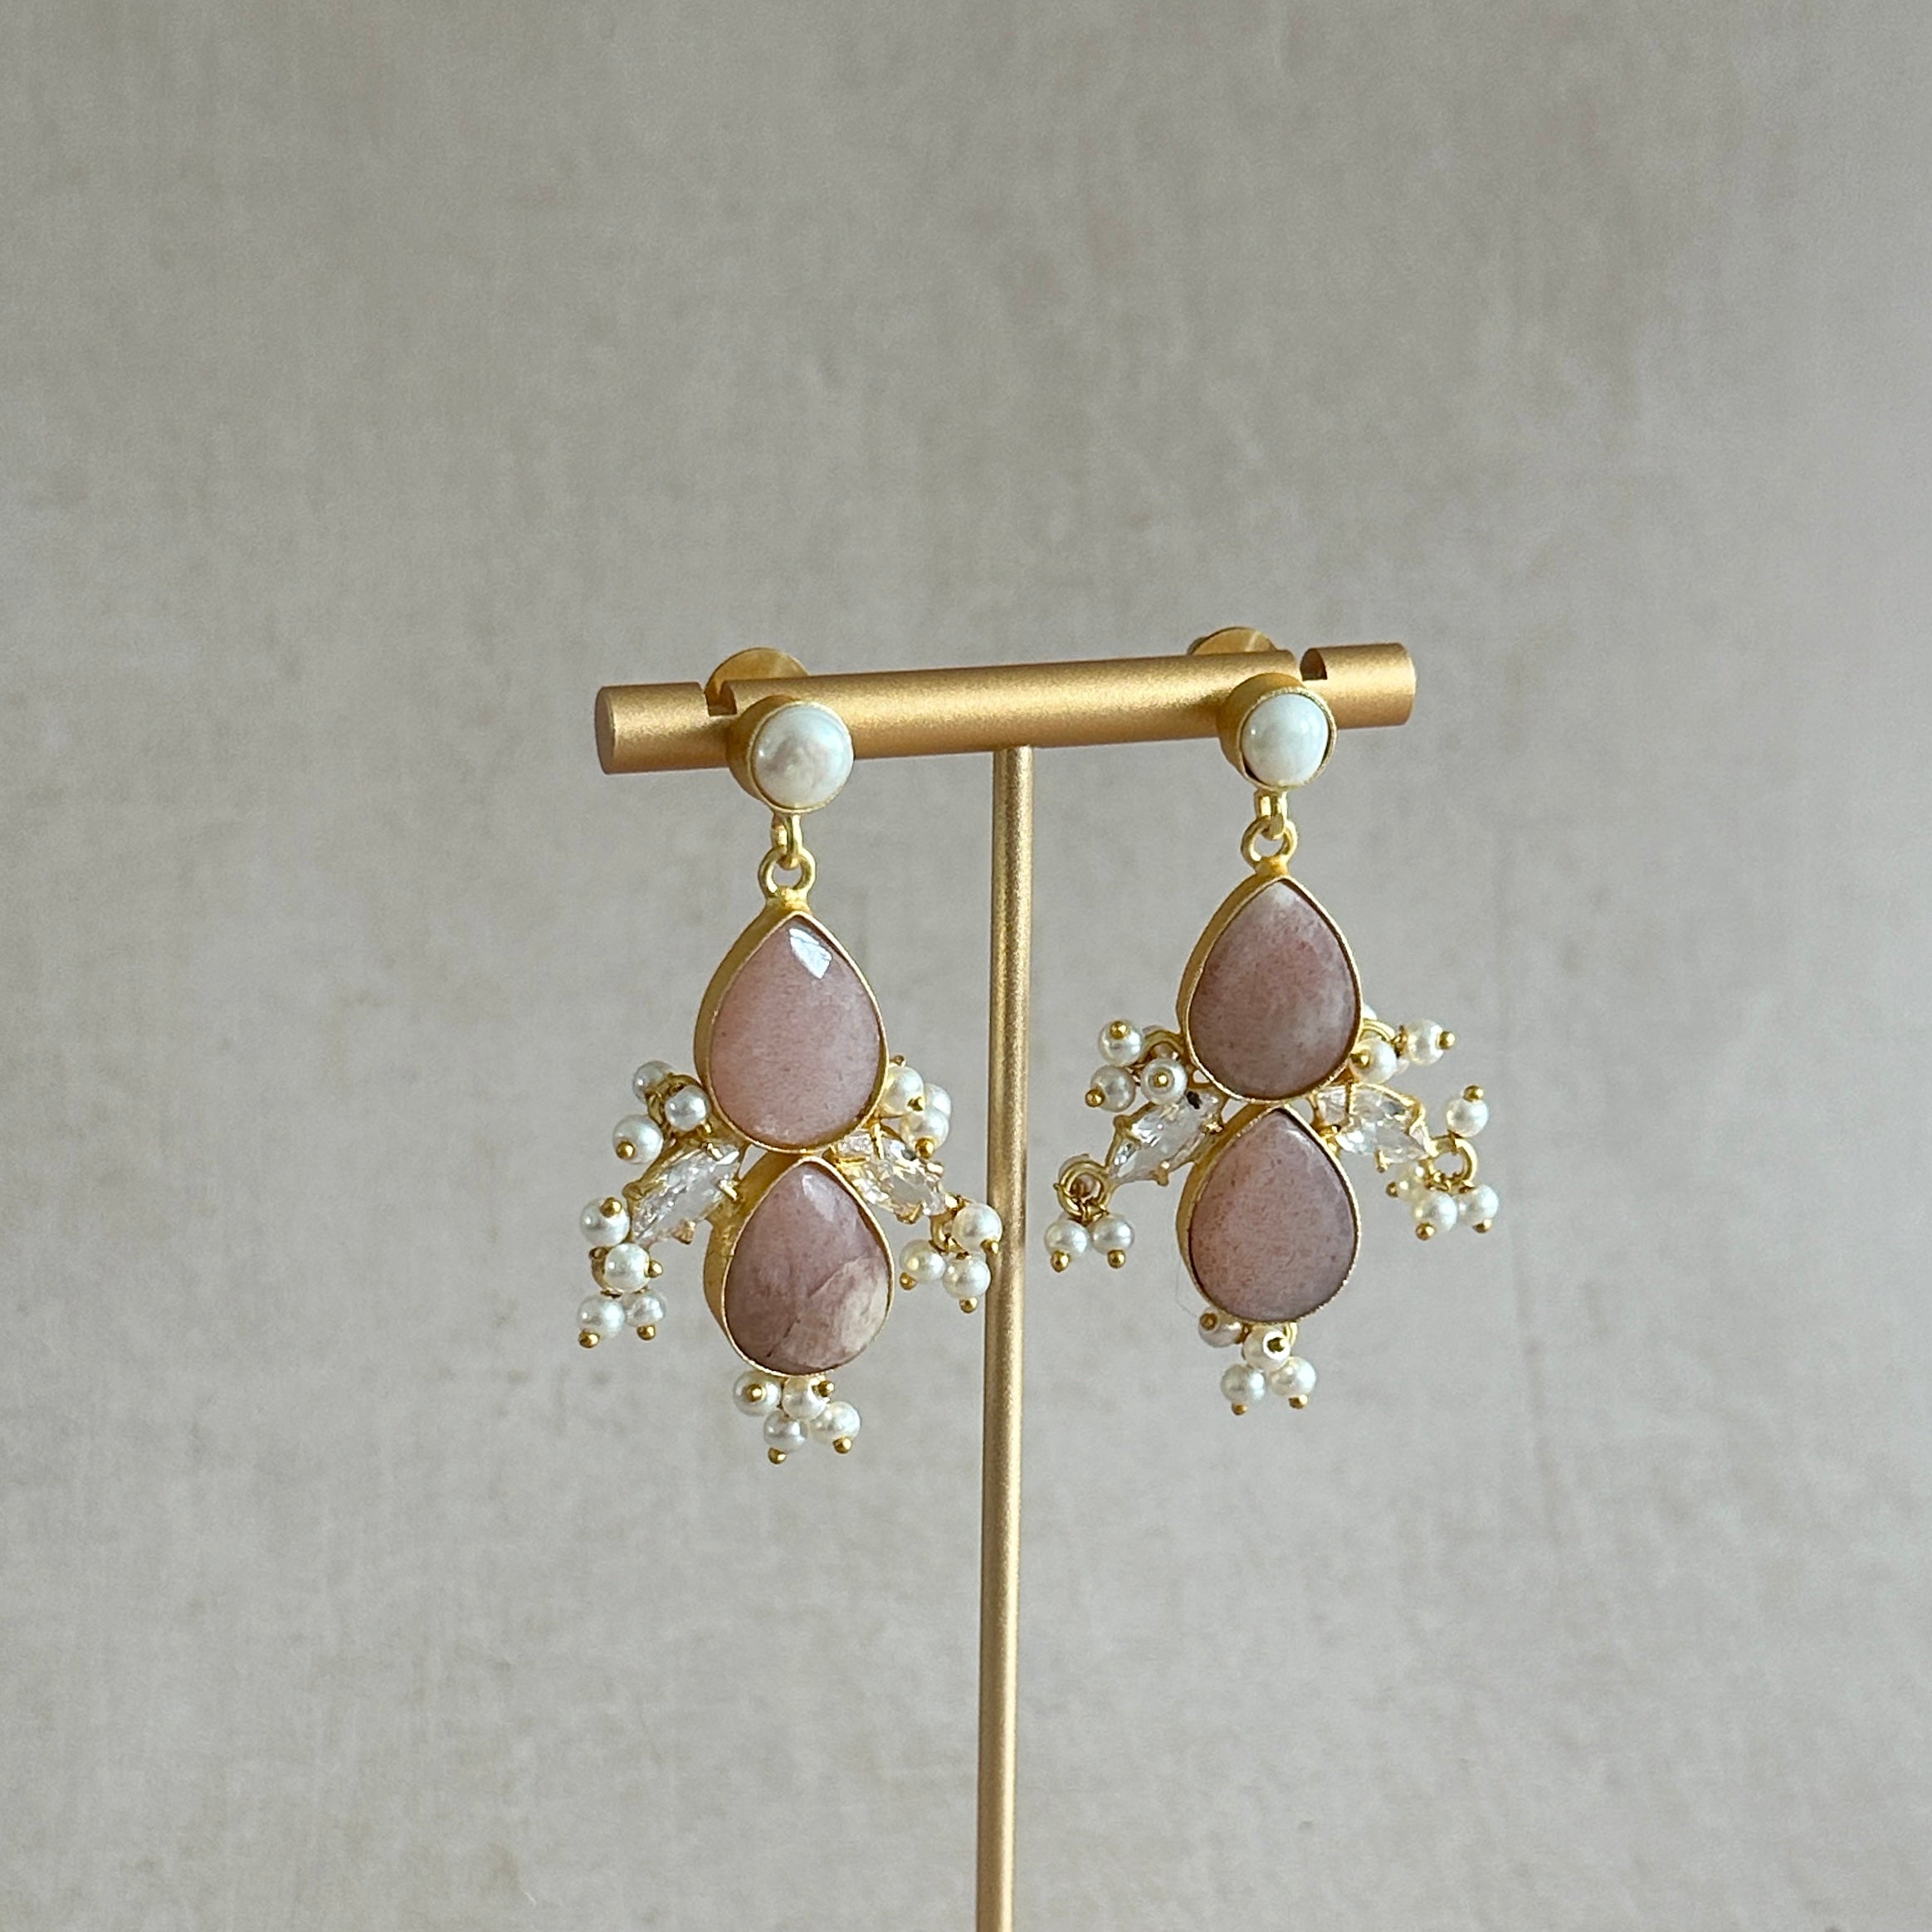 Add a touch of elegance to any outfit with our Mink Crystal Drop Earrings. These stunning earrings feature a beautiful pearl accent and sparkling cubic zirconia, creating a timeless and sophisticated drop design. Elevate your style with our must-have accessories.